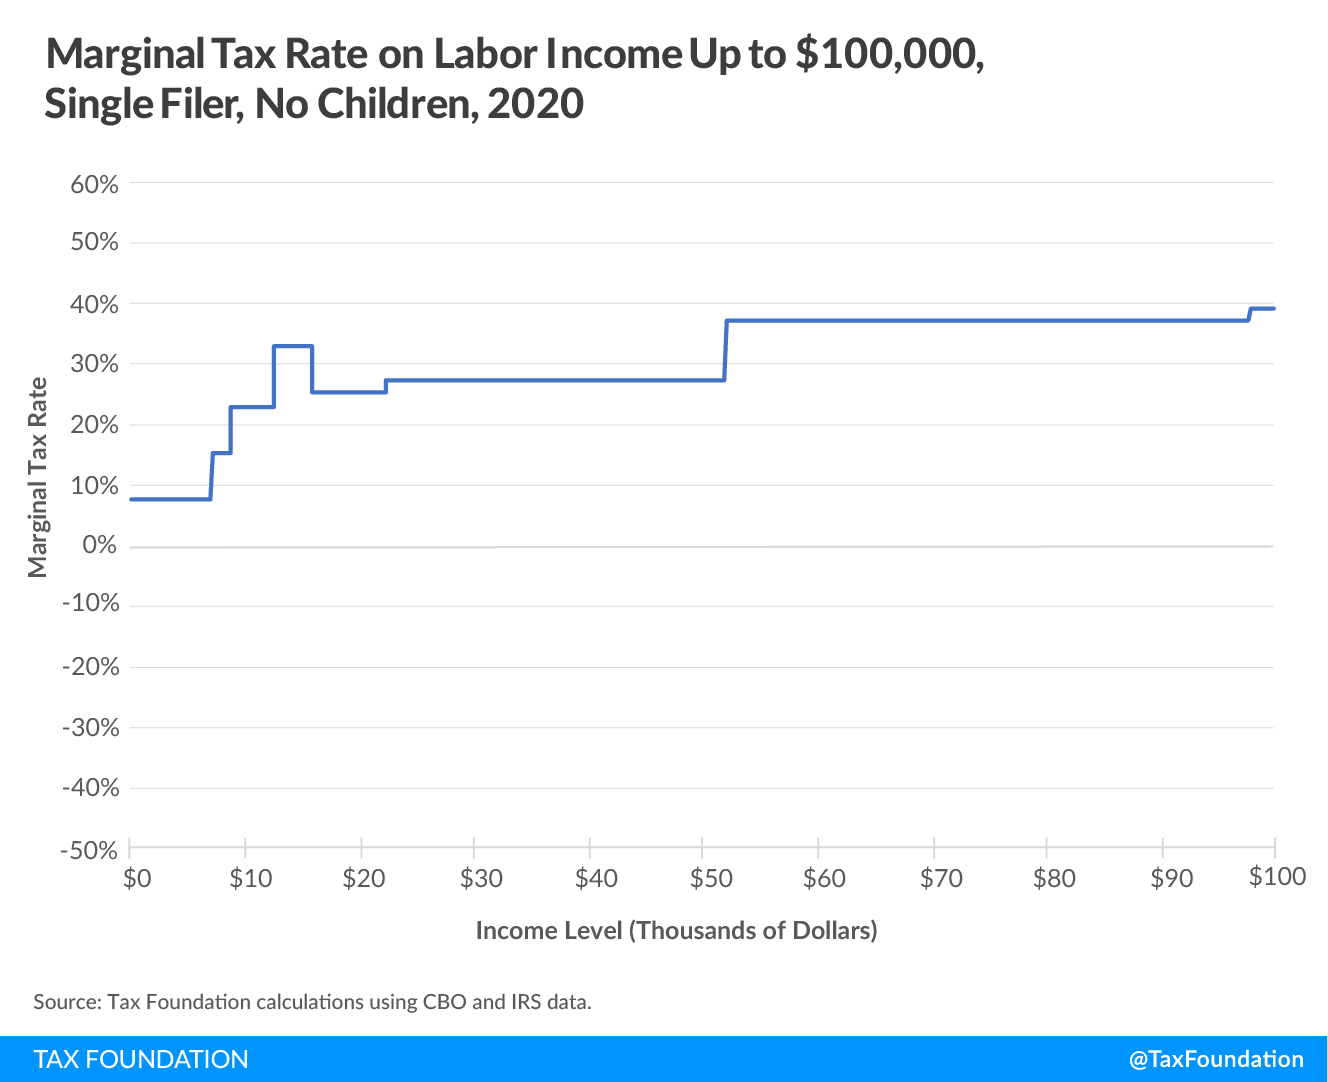 Marginal tax rate on labor income up to $100,000, single filer, no children 2020, Marginal Tax Rates on Labor Income in the U.S. After the Tax Cuts and Jobs Act 